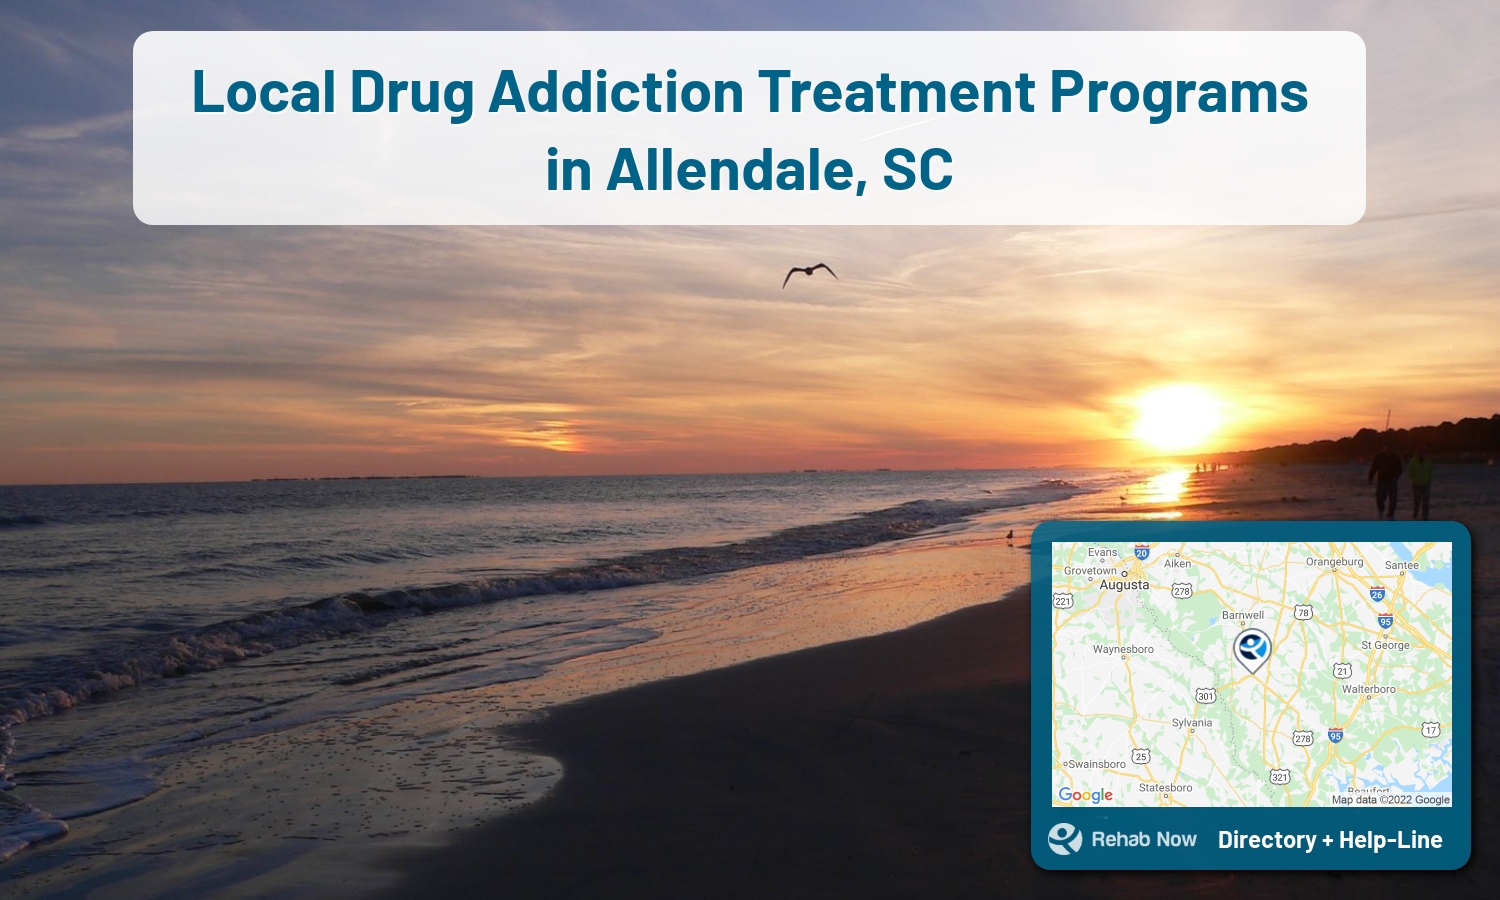 List of alcohol and drug treatment centers near you in Allendale, South Carolina. Research certifications, programs, methods, pricing, and more.